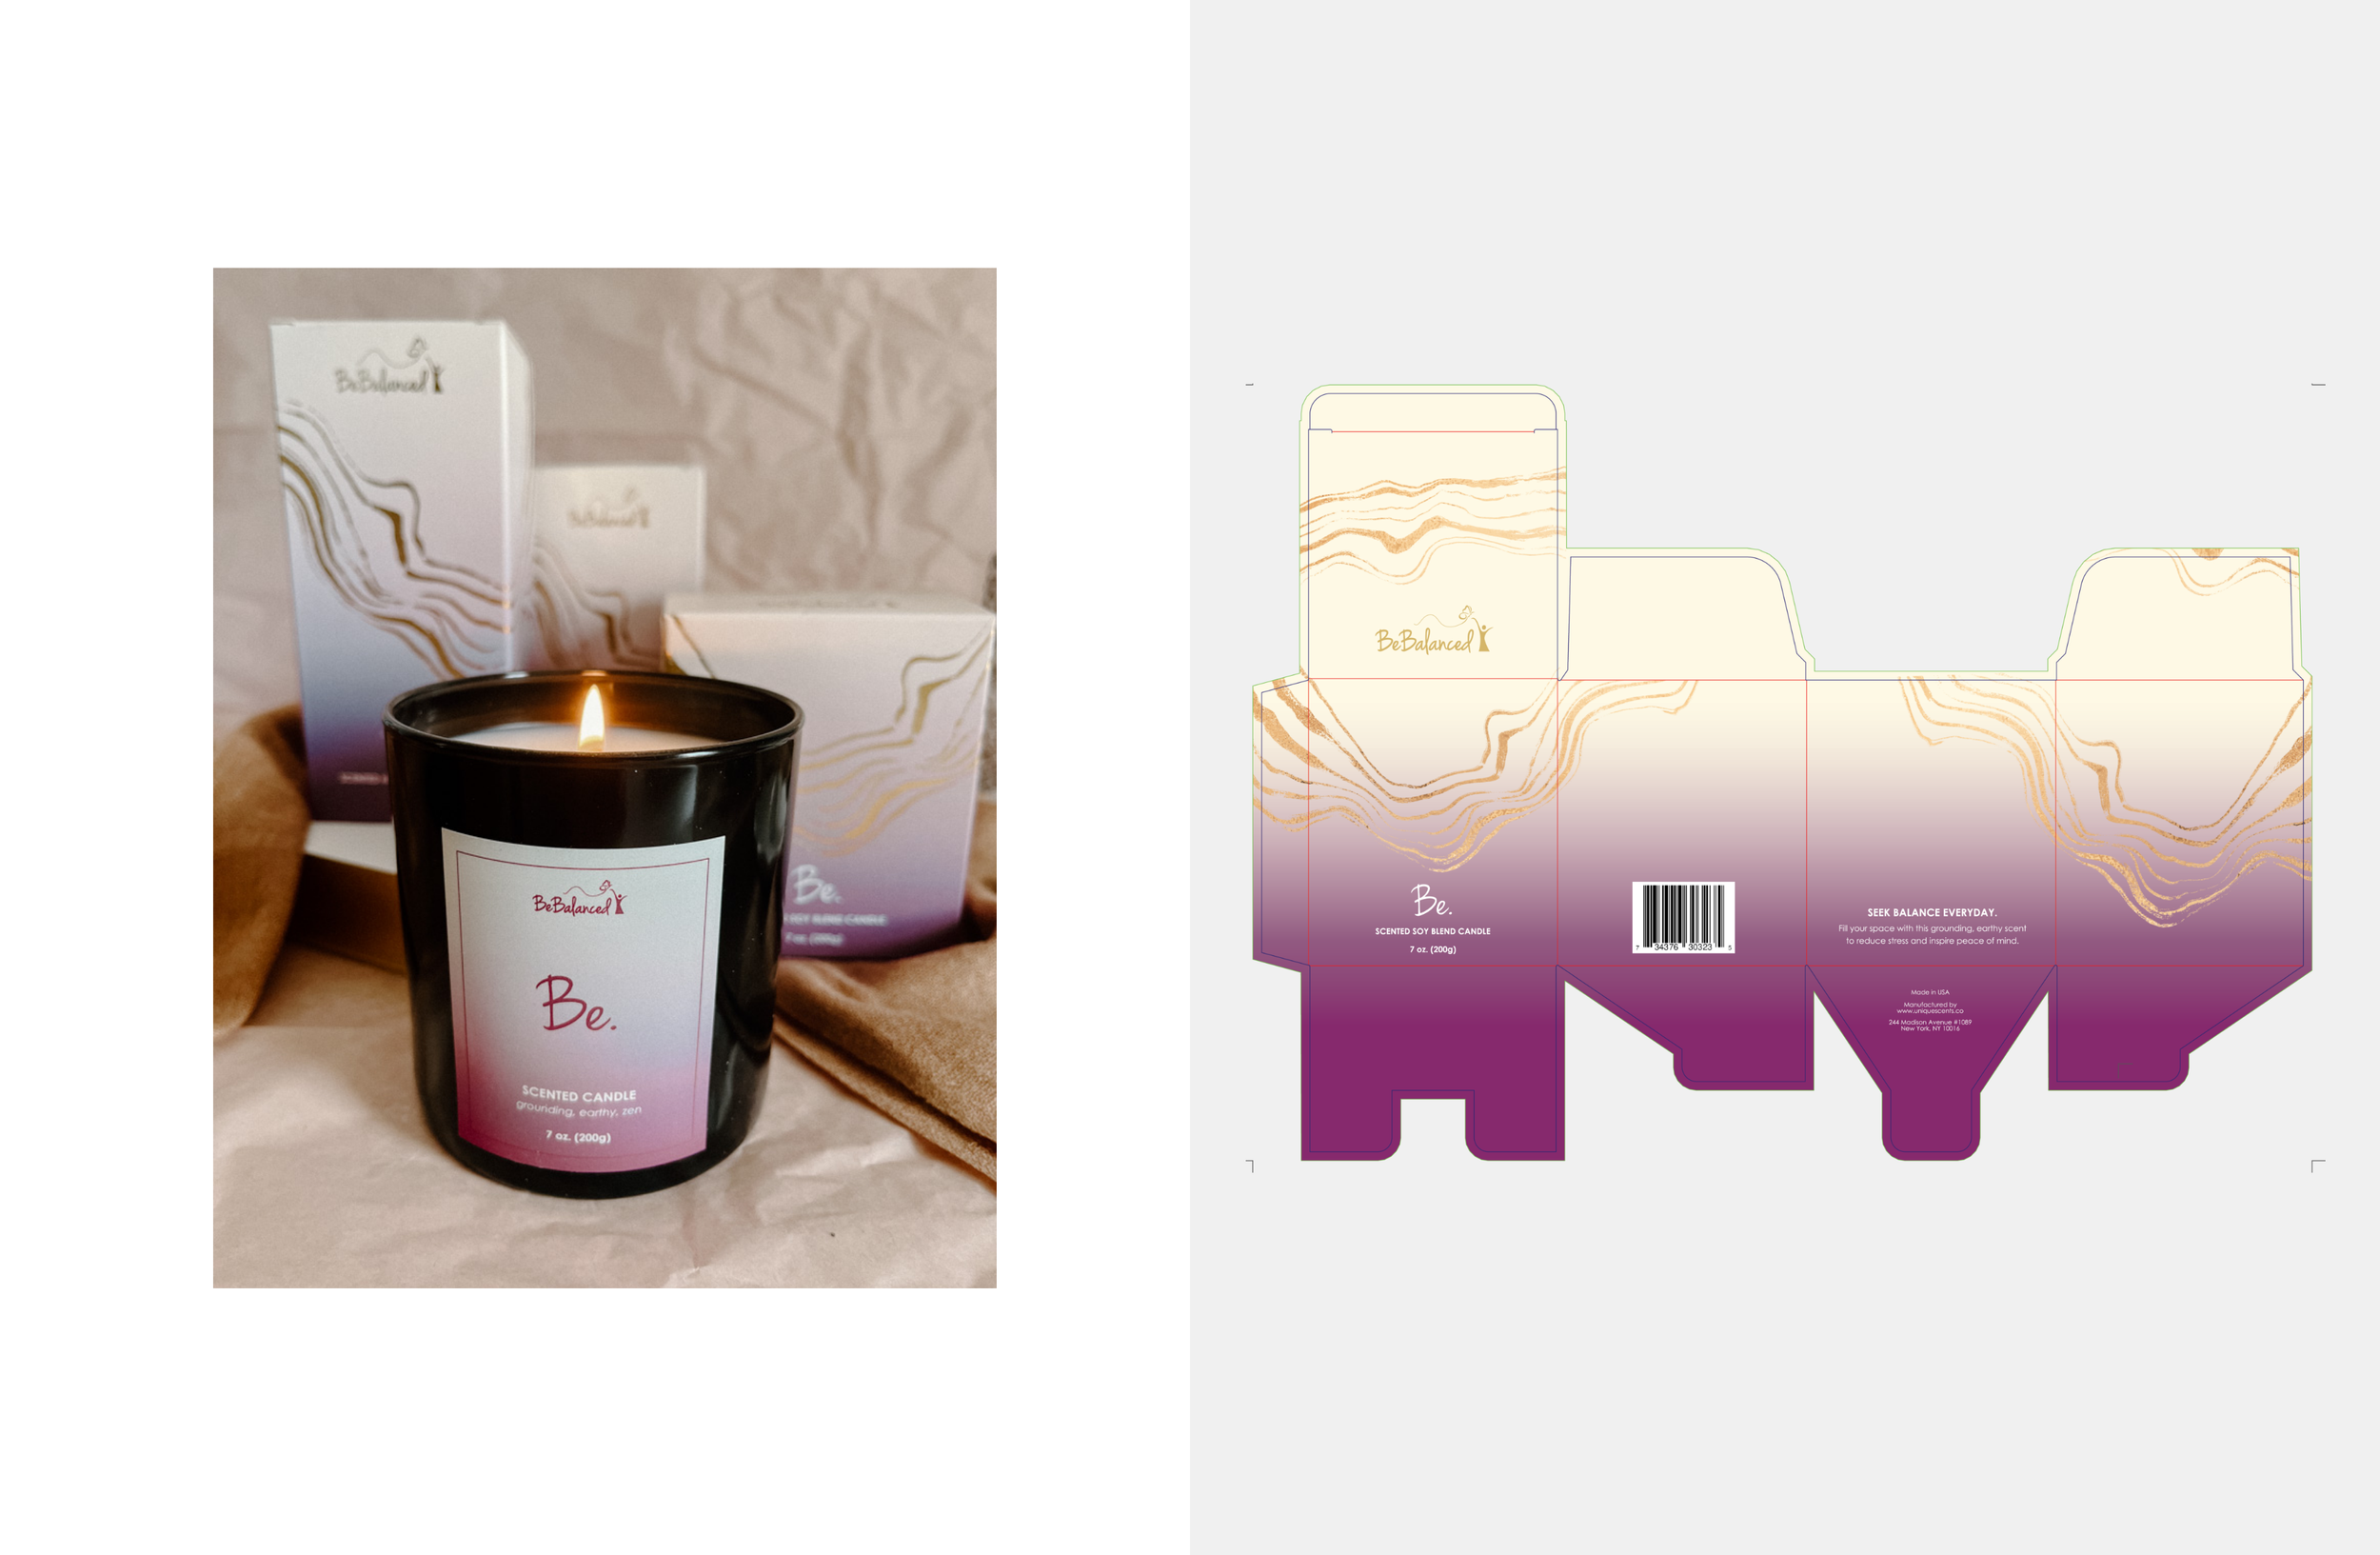 WildHive_BeBalanced-candle-andskincare-packaging_7-1.png